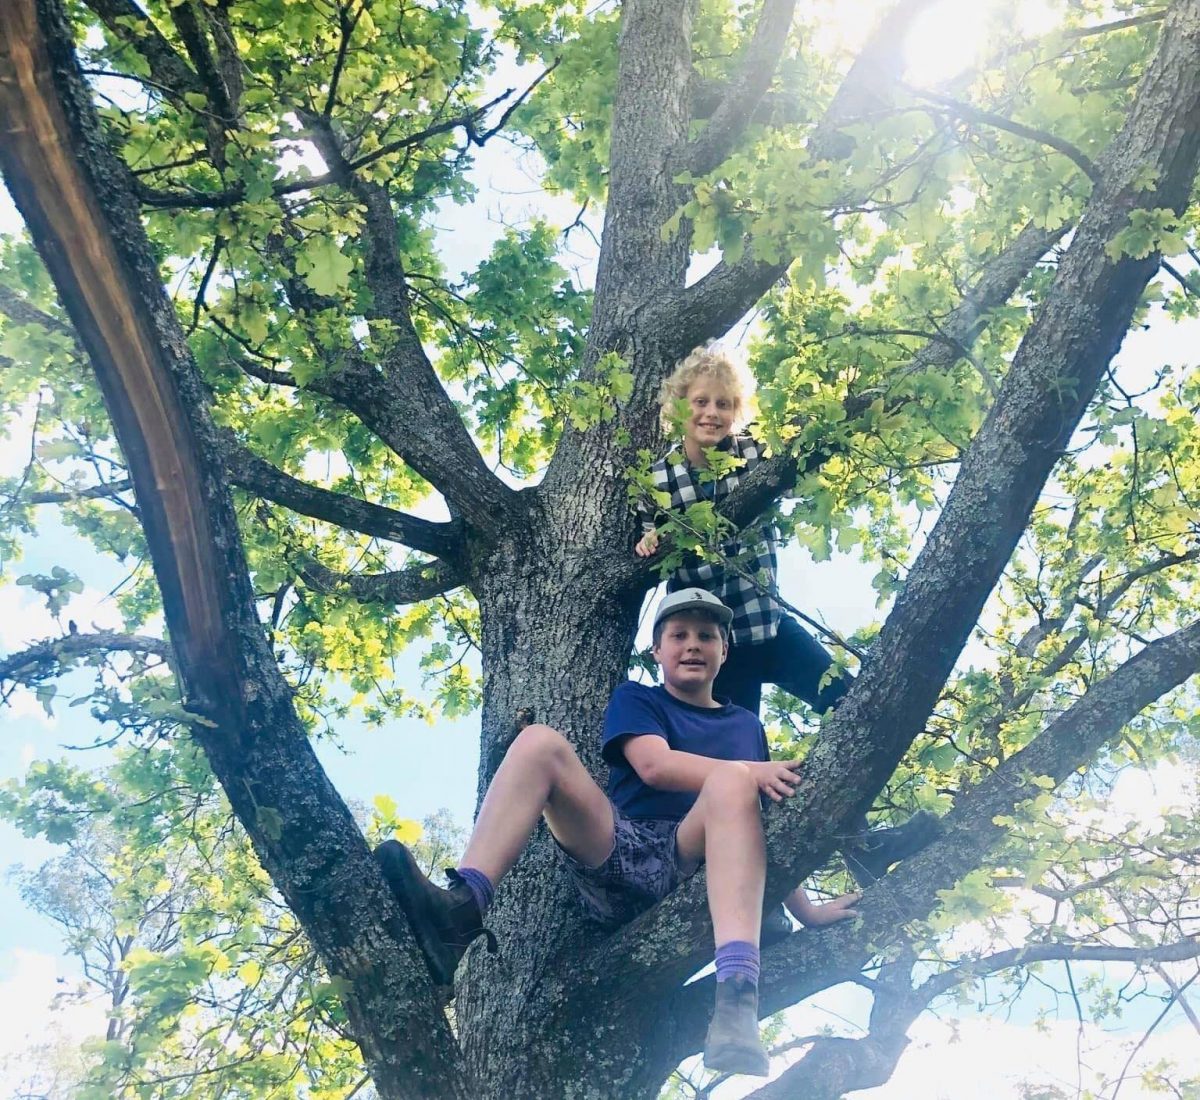 Two young boys in a tree